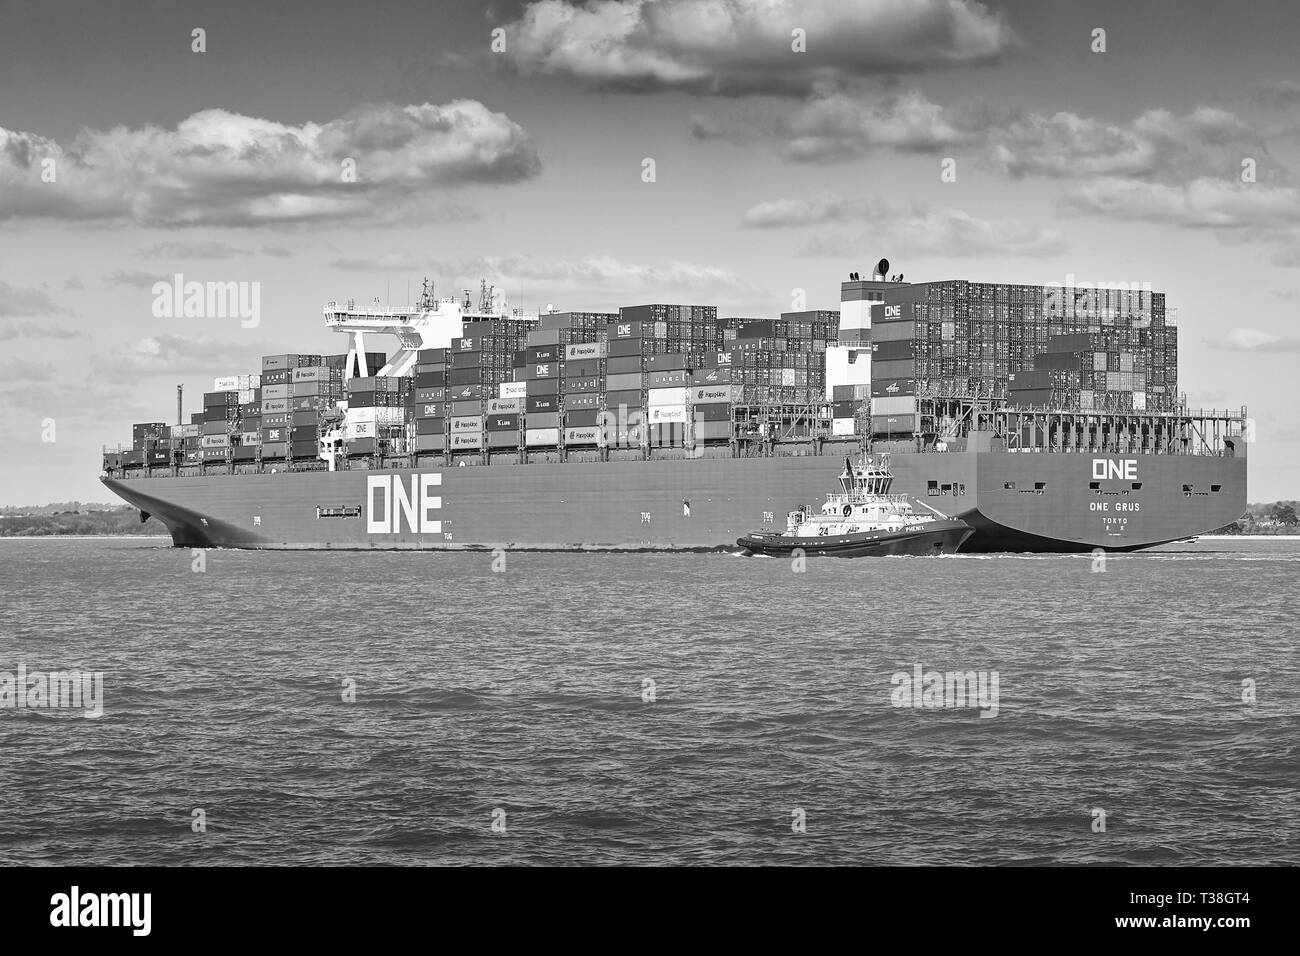 Black and White Photo Of Tug PHENIX Guiding The New, Ocean Network Express Container Ship, ONE GRUS, As She Approaches The Port Of Southampton, UK. Stock Photo